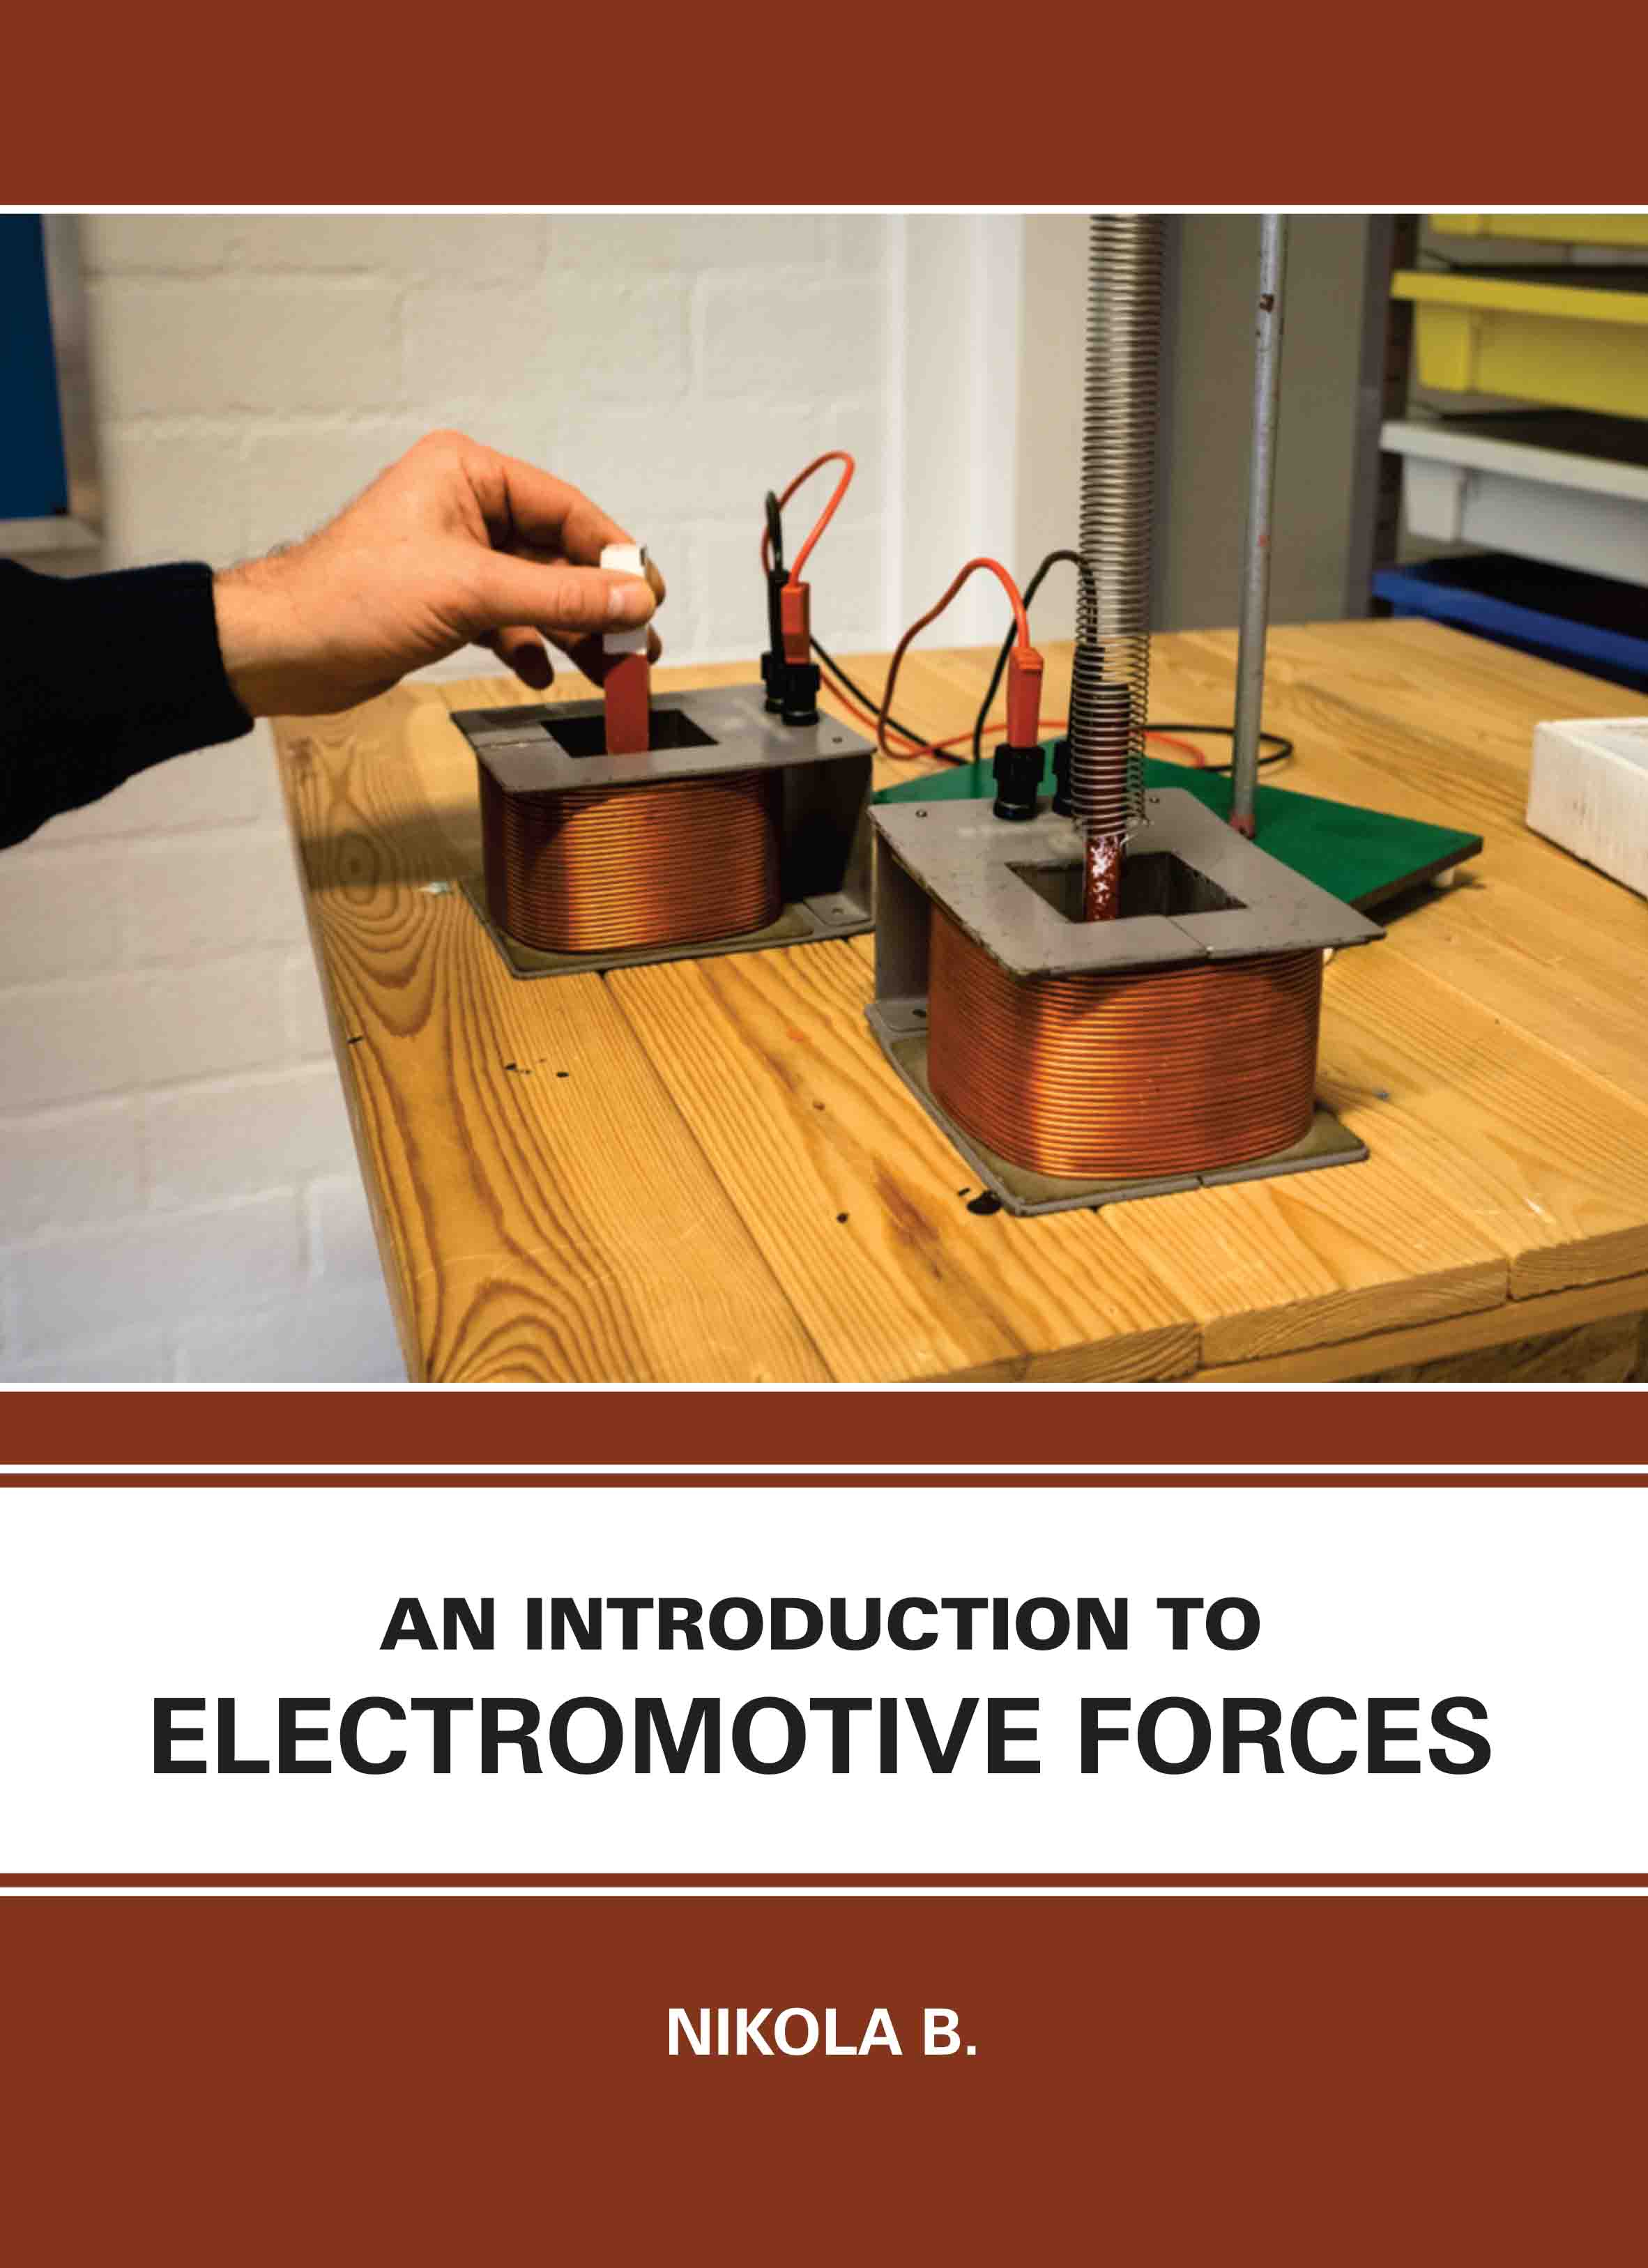 An Introduction to Electromotive Forces